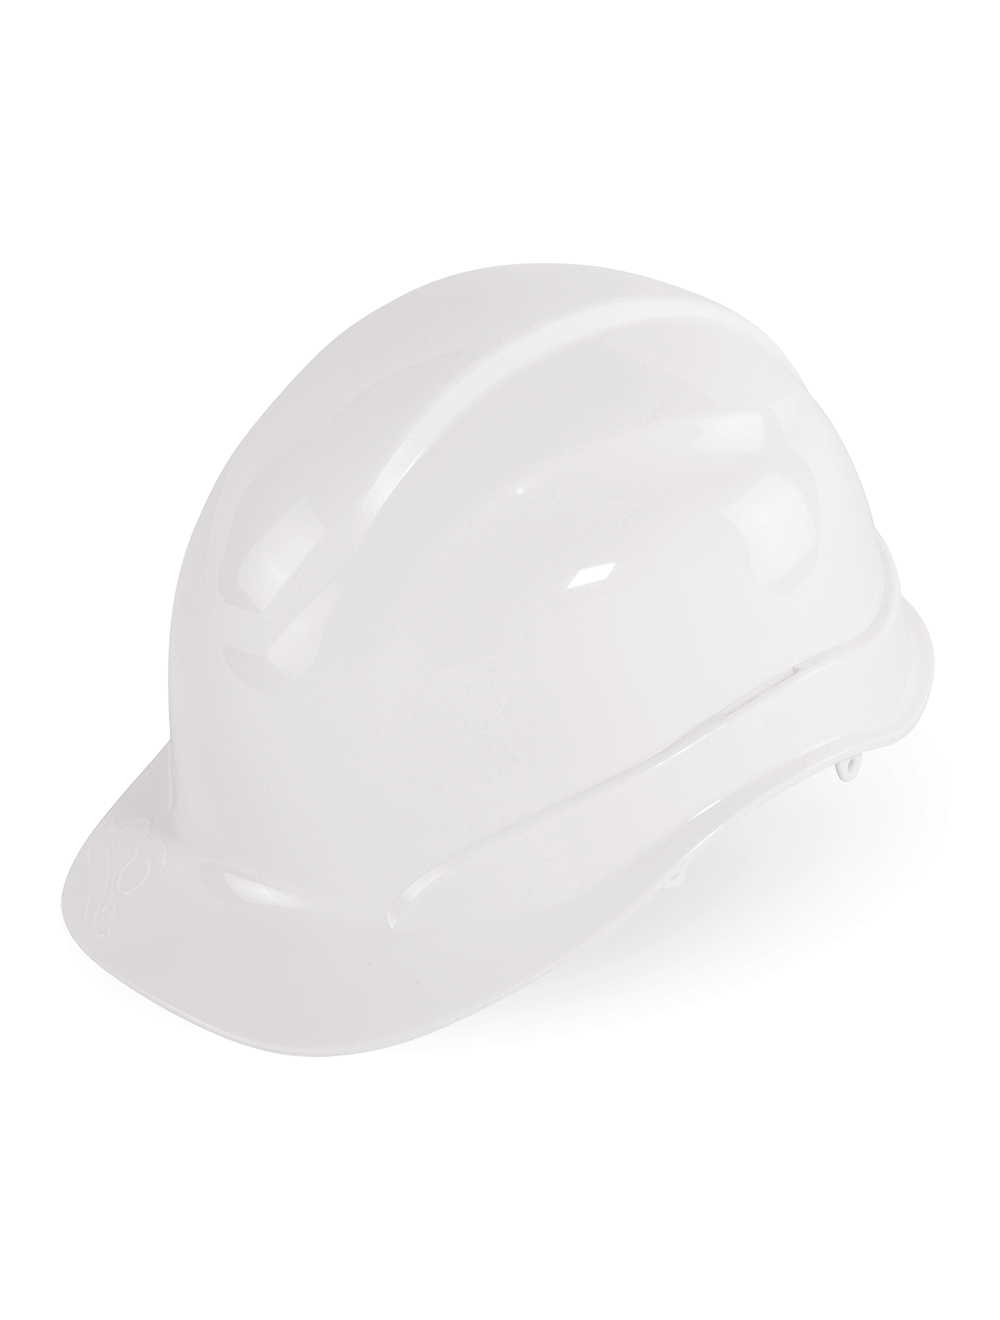 Bullhead Safety™ Head Protection White Unvented Cap Style Hard Hat With Six-Point Slide Lock Suspension - HH-C1-W